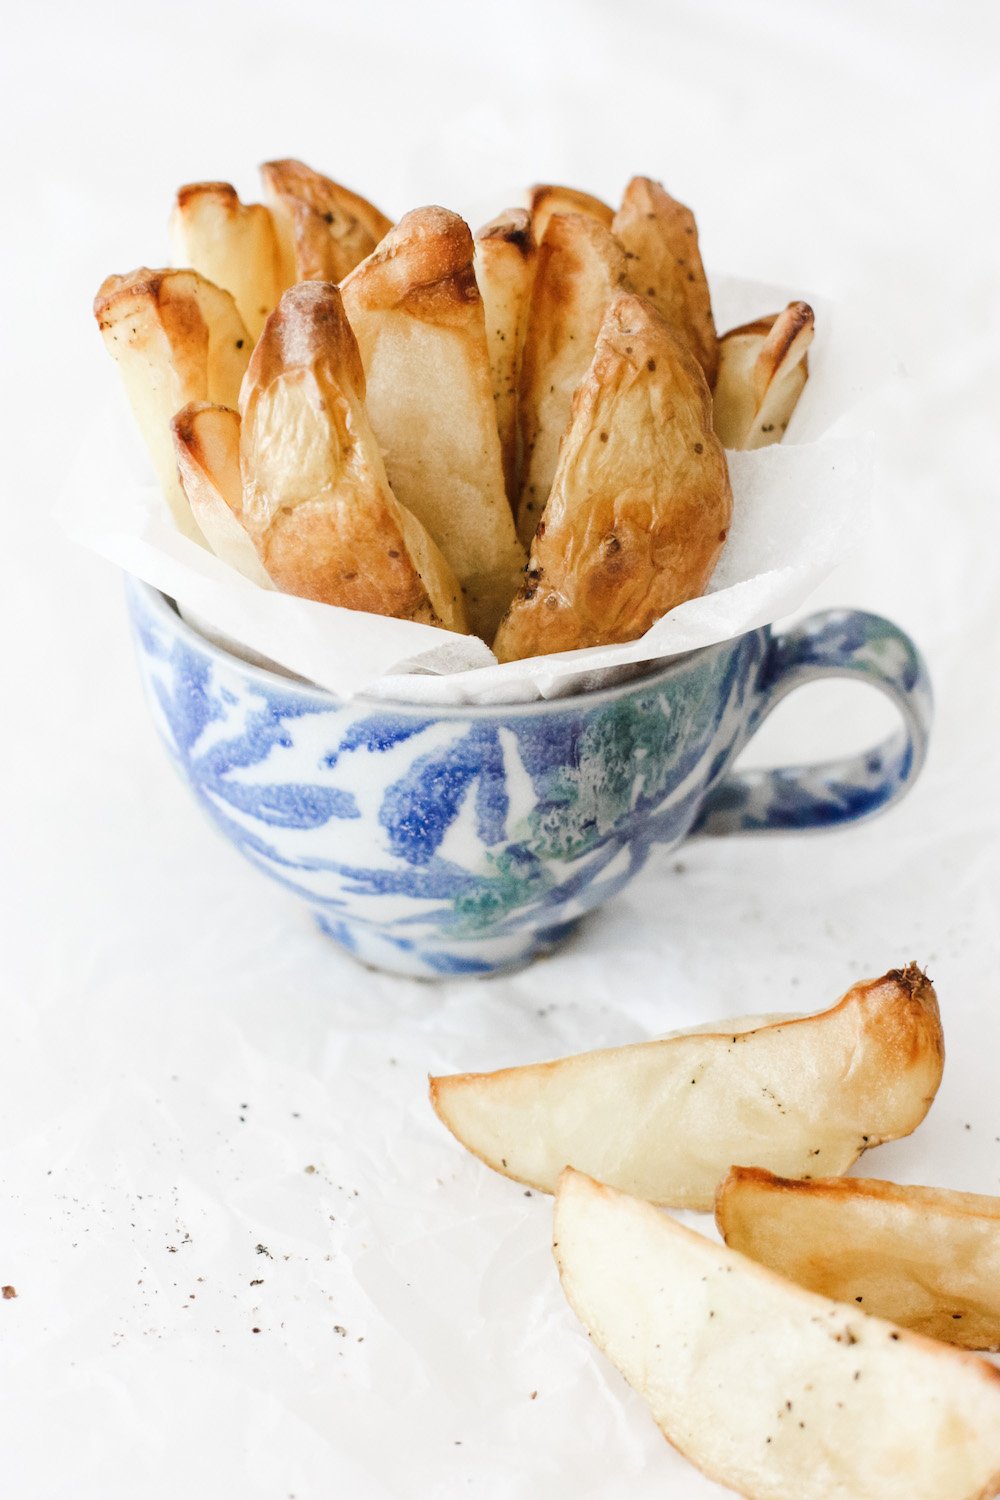 These easy oven chips are a healthy food swap